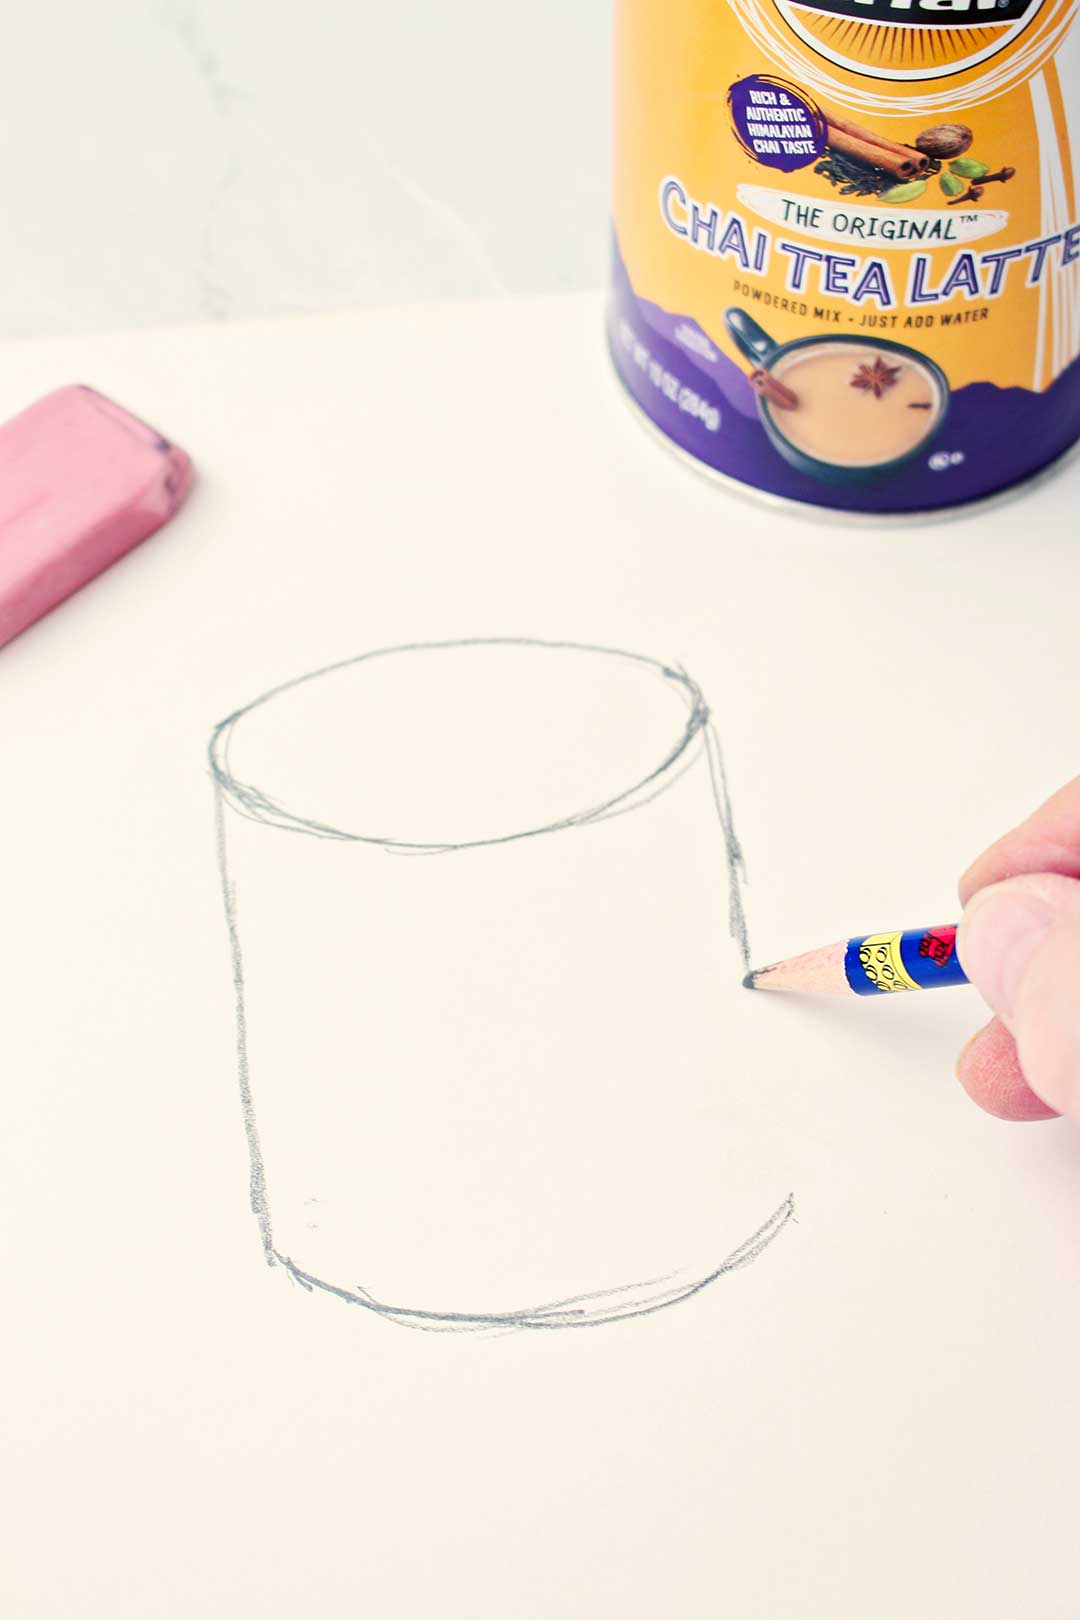 Rough drawing of a cylinder with chai tea latte container nearby.